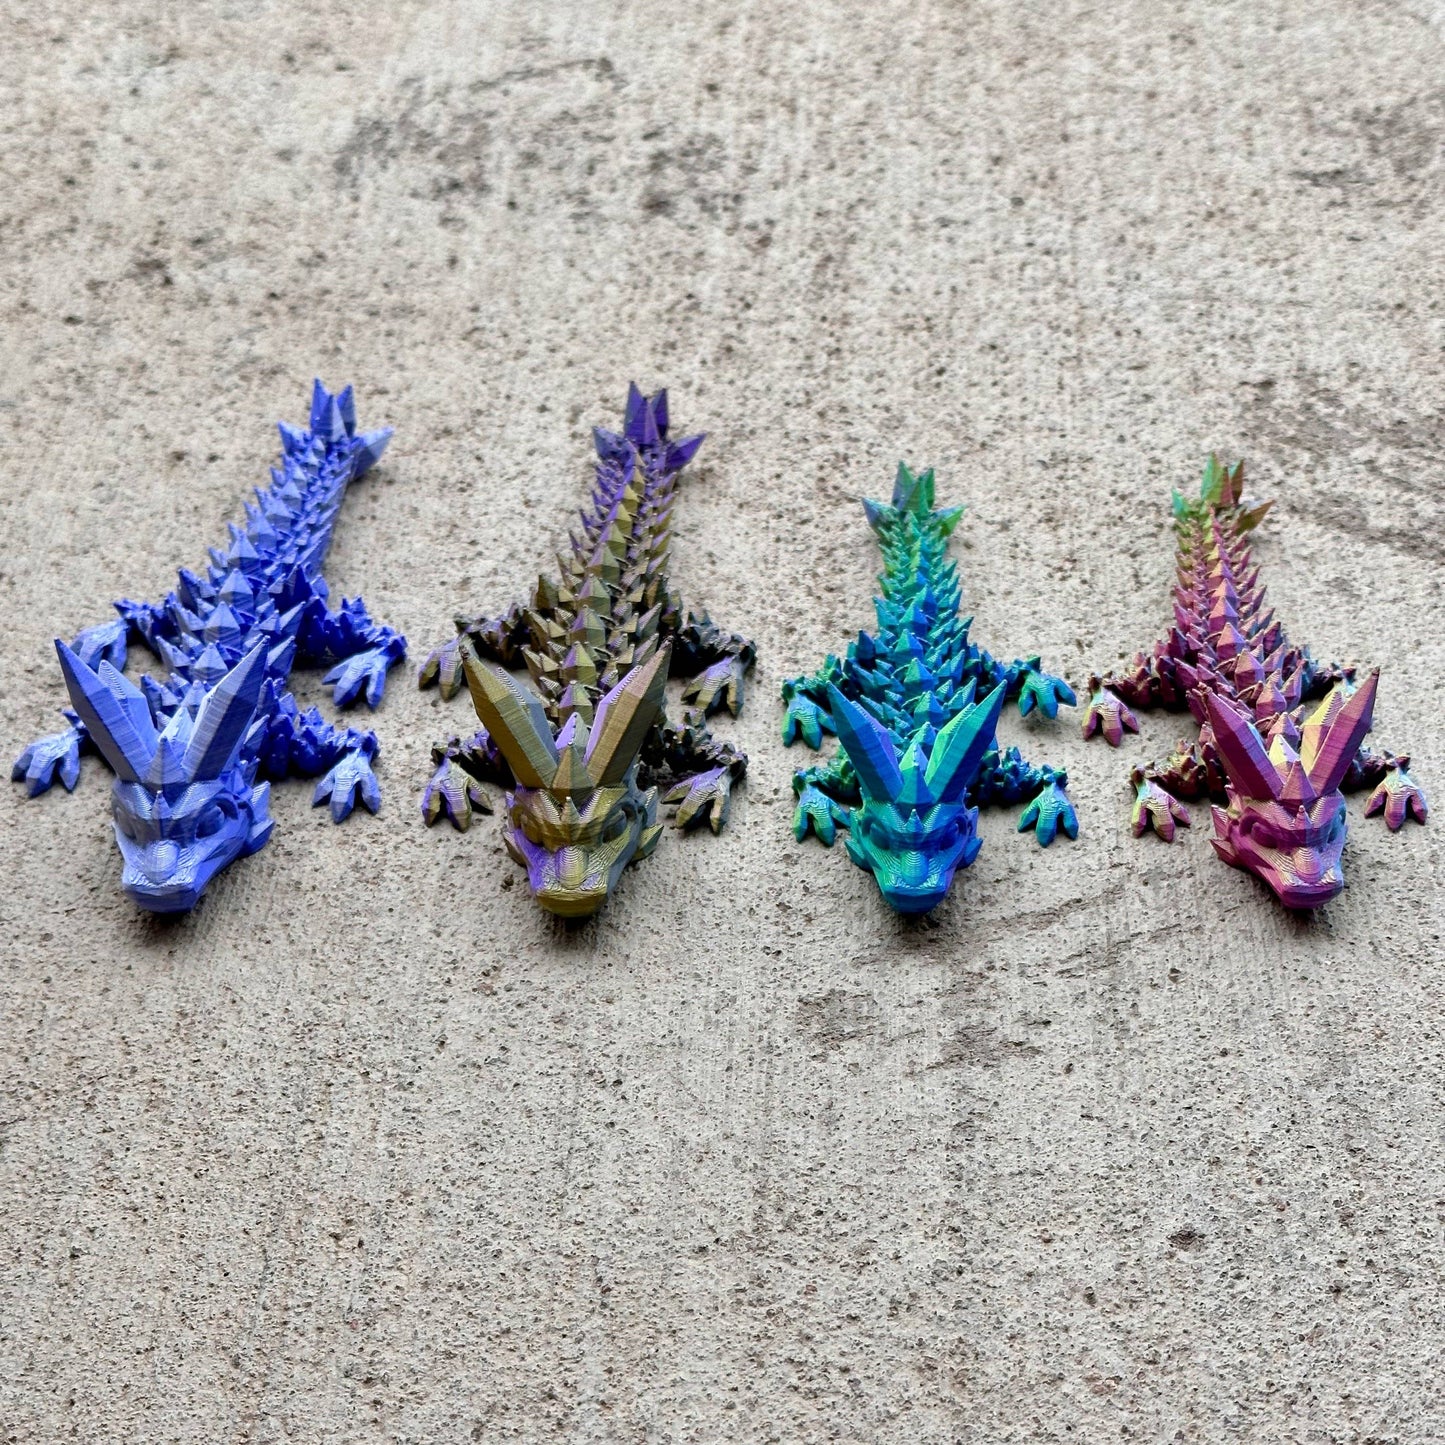 3D Printed Baby Crystal Dragon: Infant - 6"